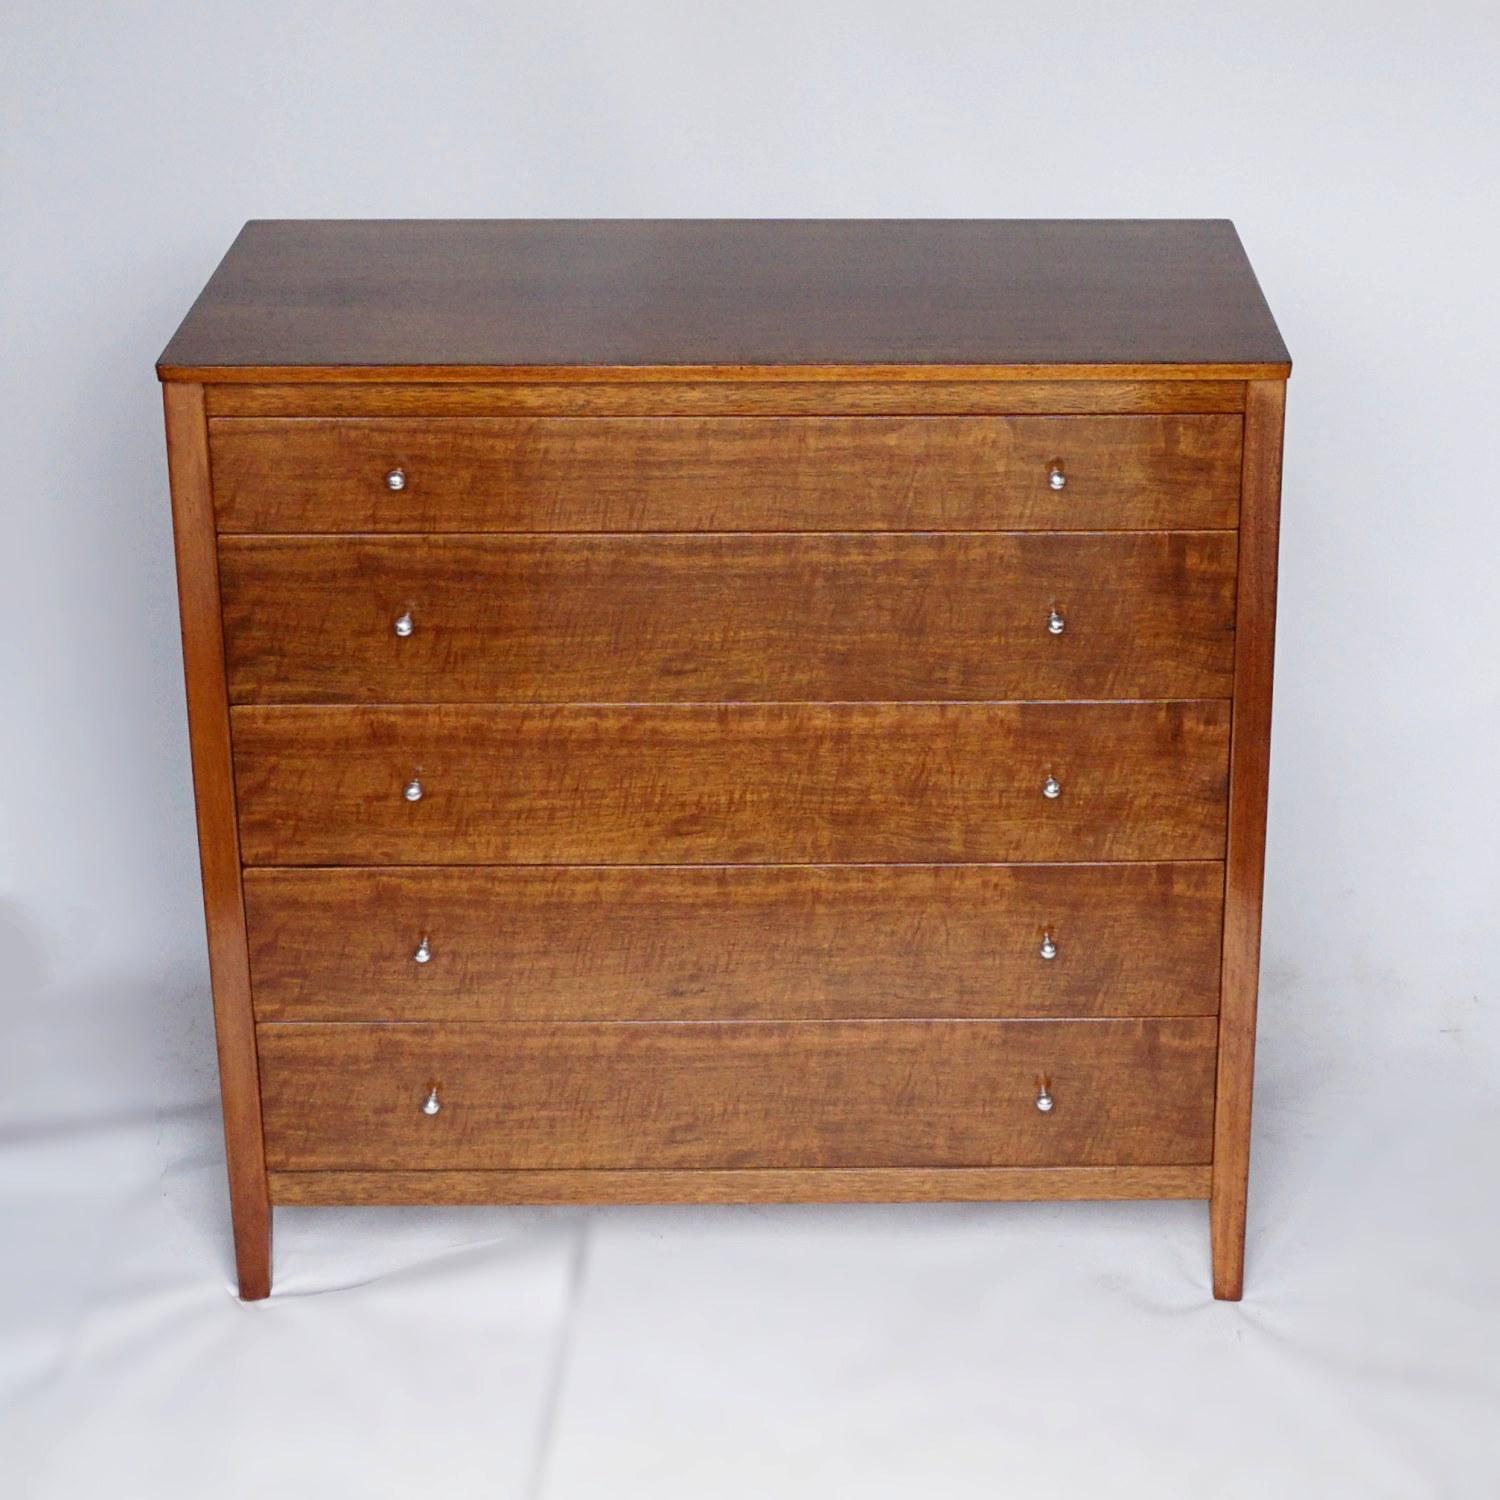 A midcentury chest of five drawers by Gordon Russell. Indian Laurel wood with solid teak frame. Original chromed metal handles. 

Dimensions: H 96cm, W 99cm, D 46cm 

Origin: English

Date: circa 1960

Item Number: 2502213

All of our